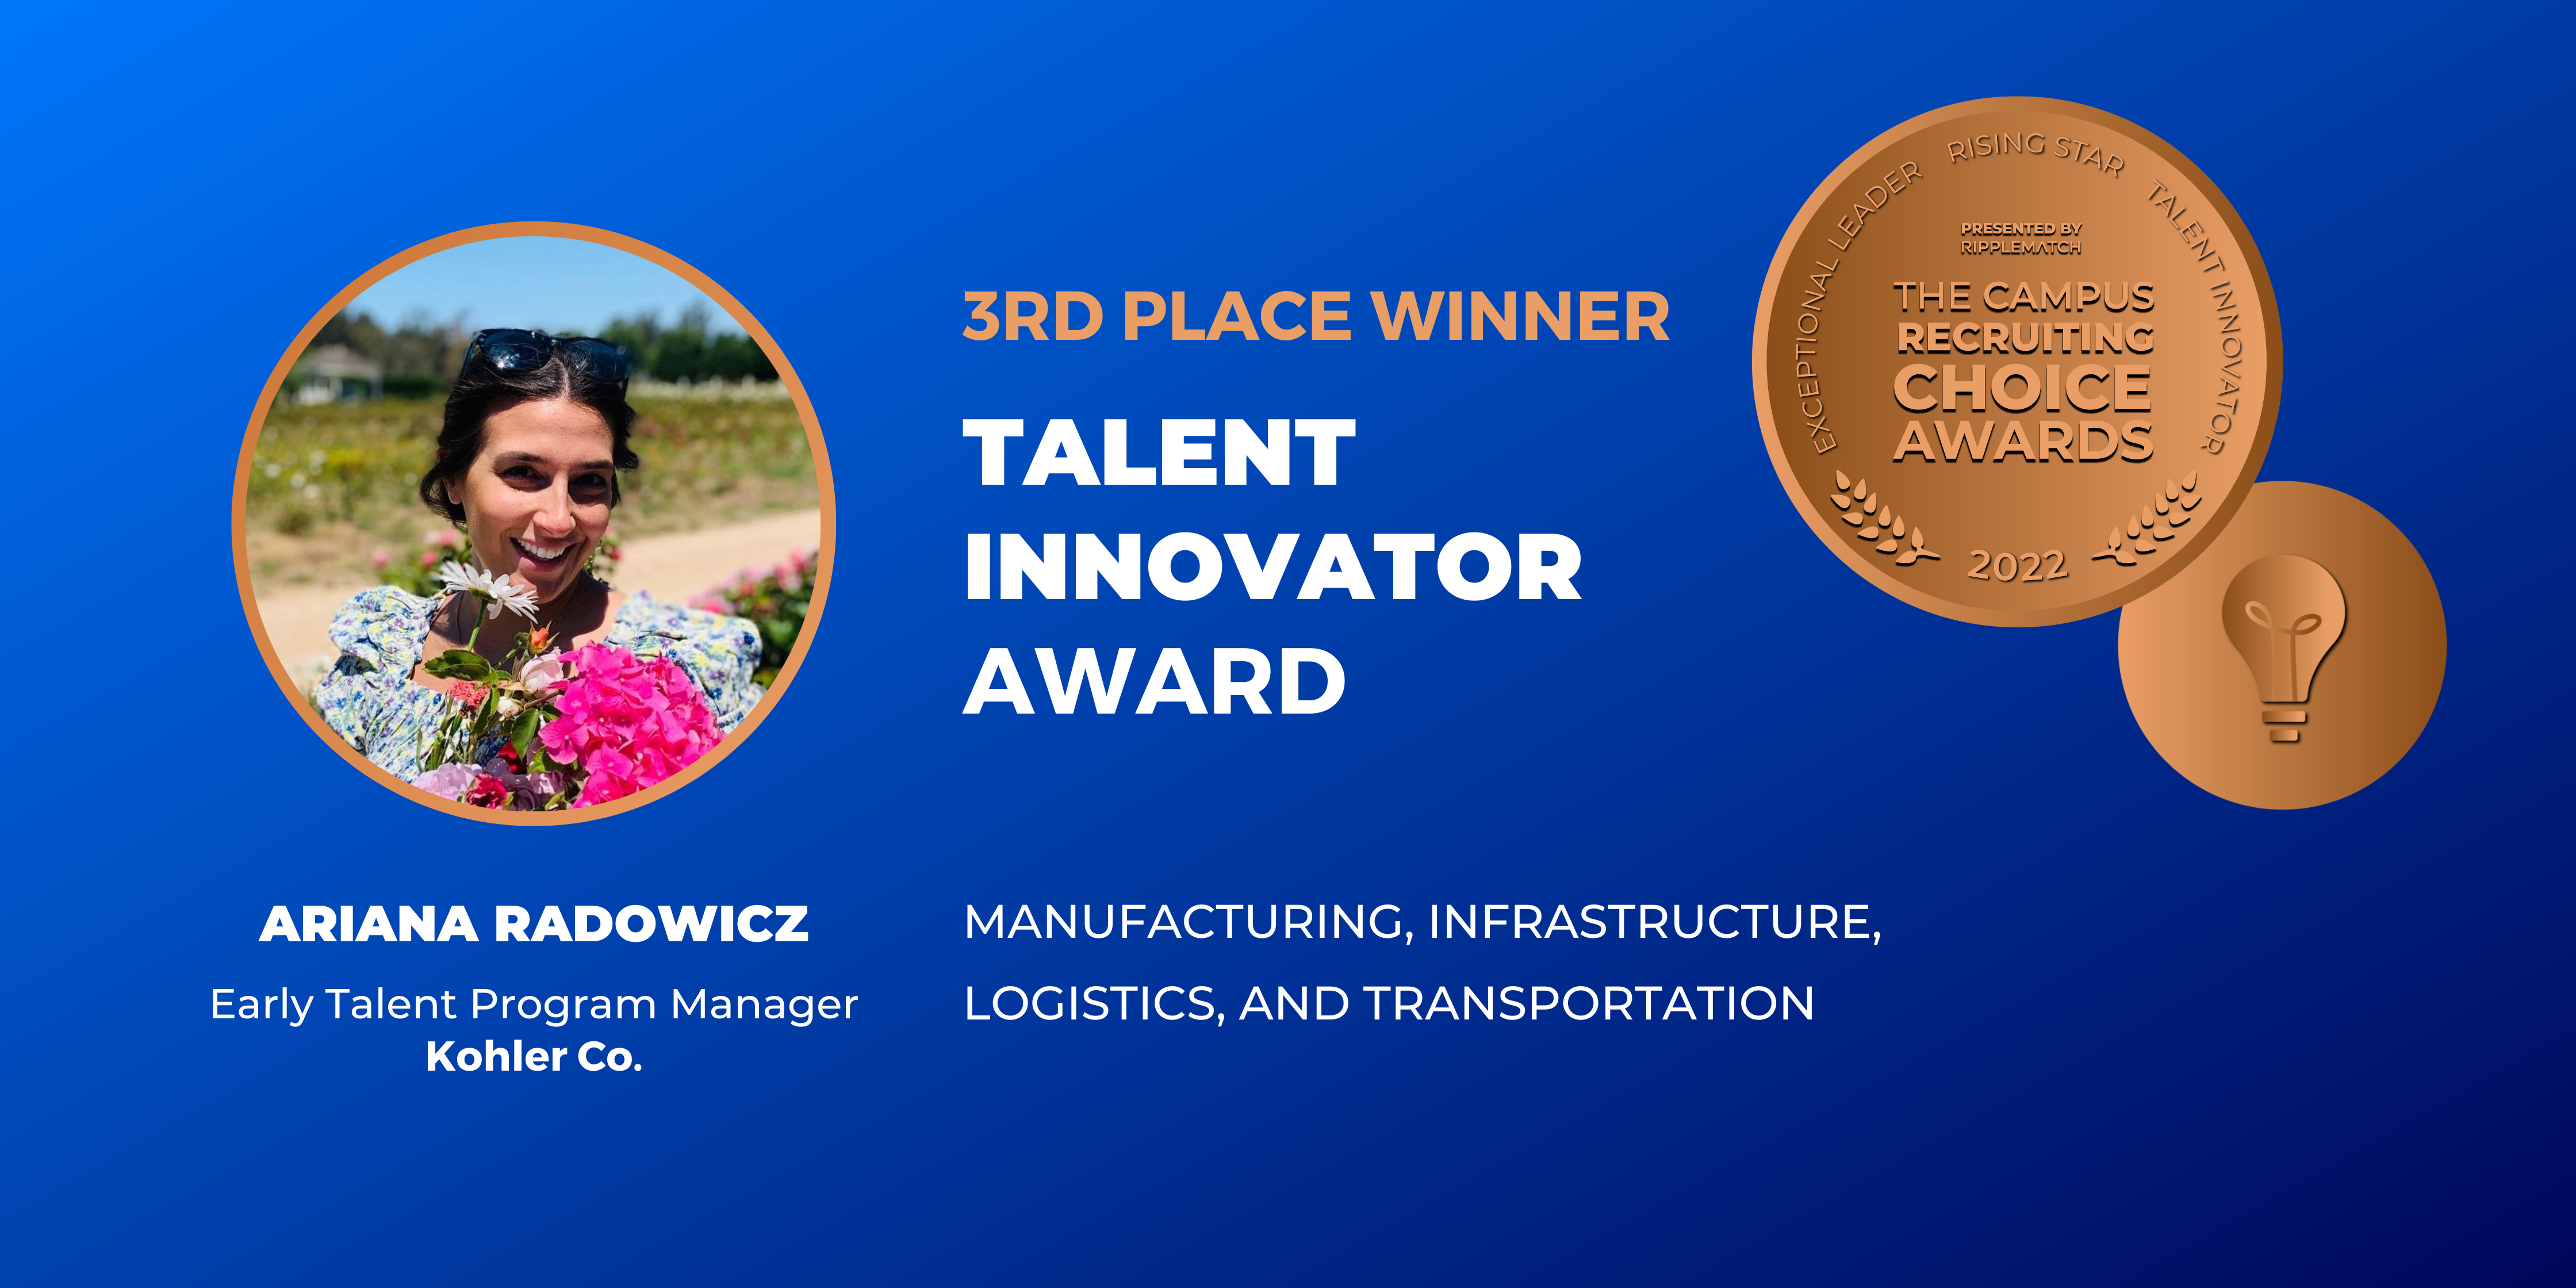 TALENT INNOVATOR - 3rd place - Manufacturing, Infrastructure, Logistics, and Transportation - Ariana Radowicz